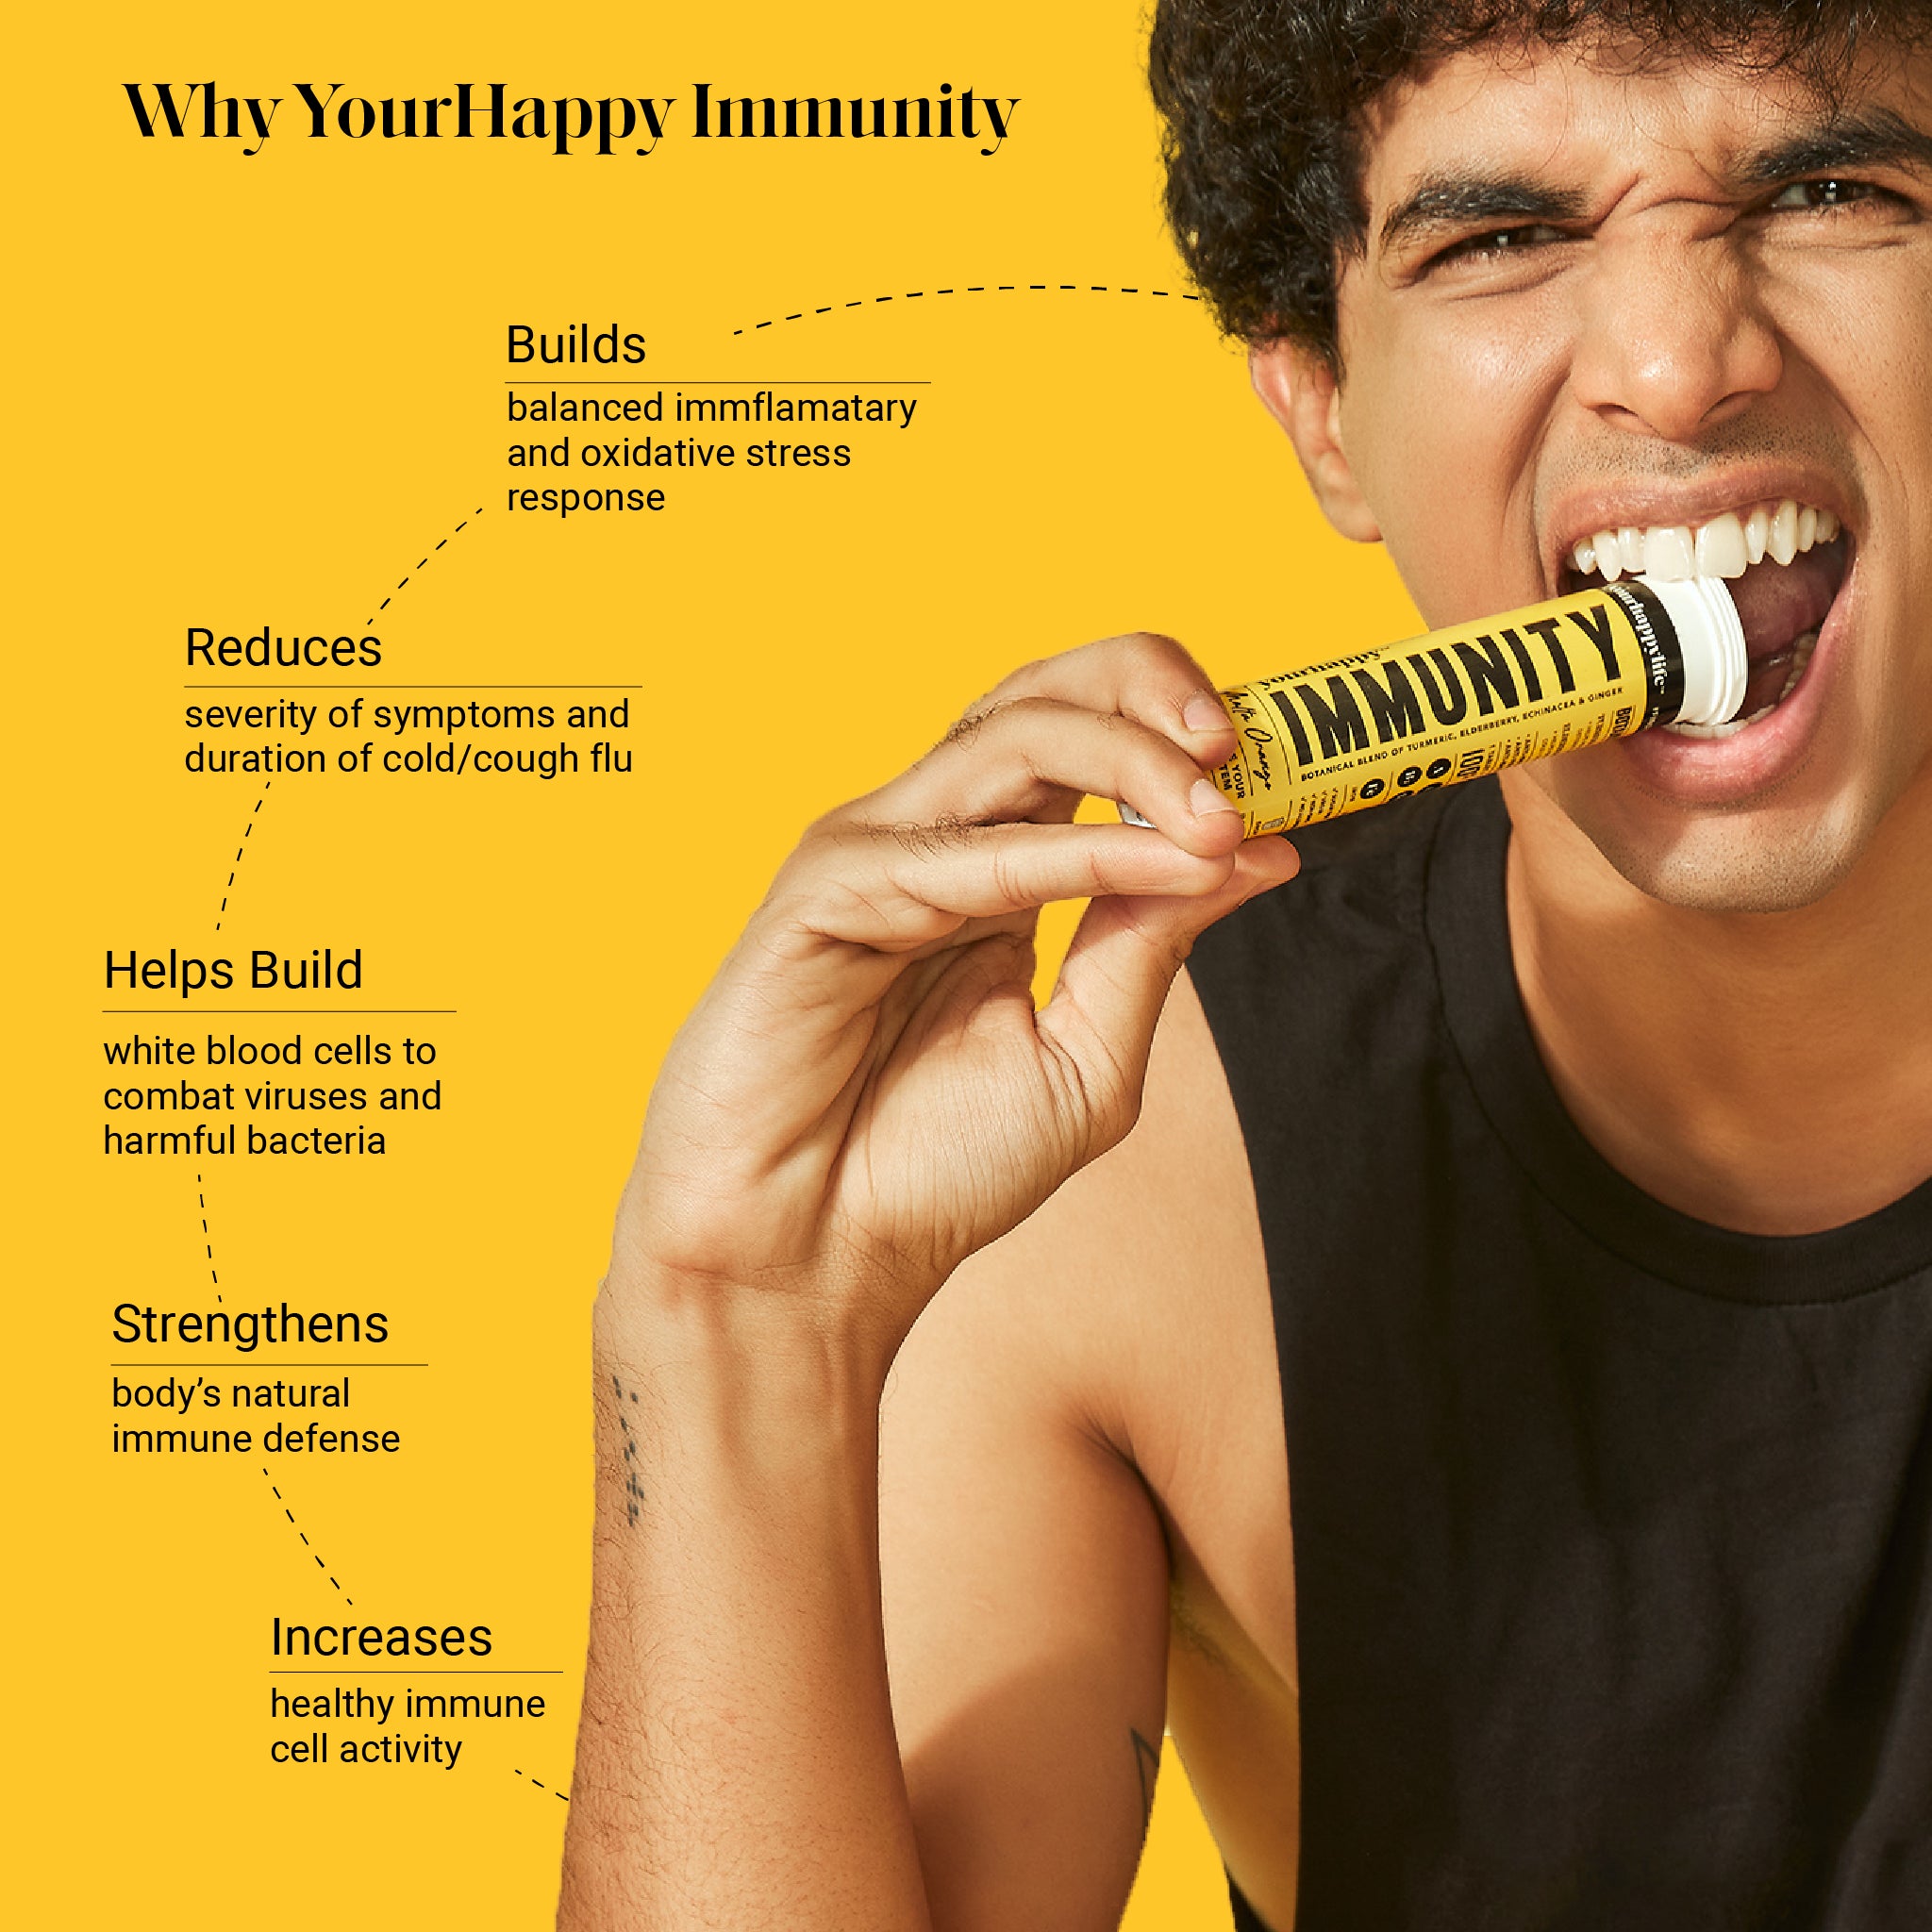 Yourhappy Immunity Boosters